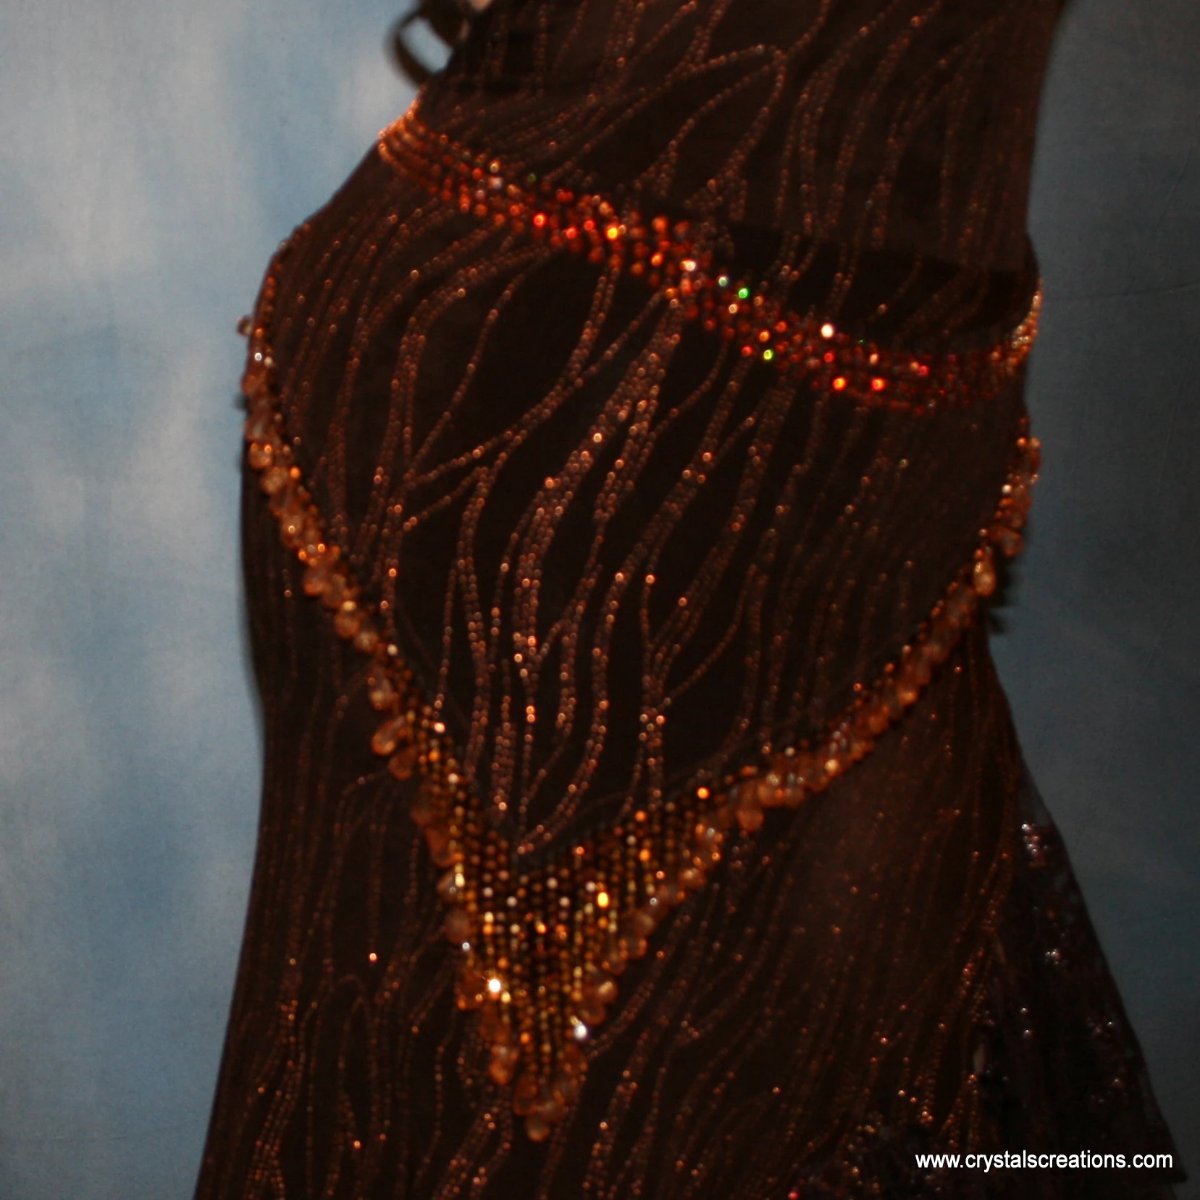 Crystal's Creations close up view of Brown tango dress, bolero dress or rumba dress created in chocolate brown &amp; bronze glitter slinky with chocolate brown metallic lace &amp; metallic tricot flounces is embellished with crystal copper Swarovski rhinestones at neckpiece & hipsash, which also has extensive hand beading.